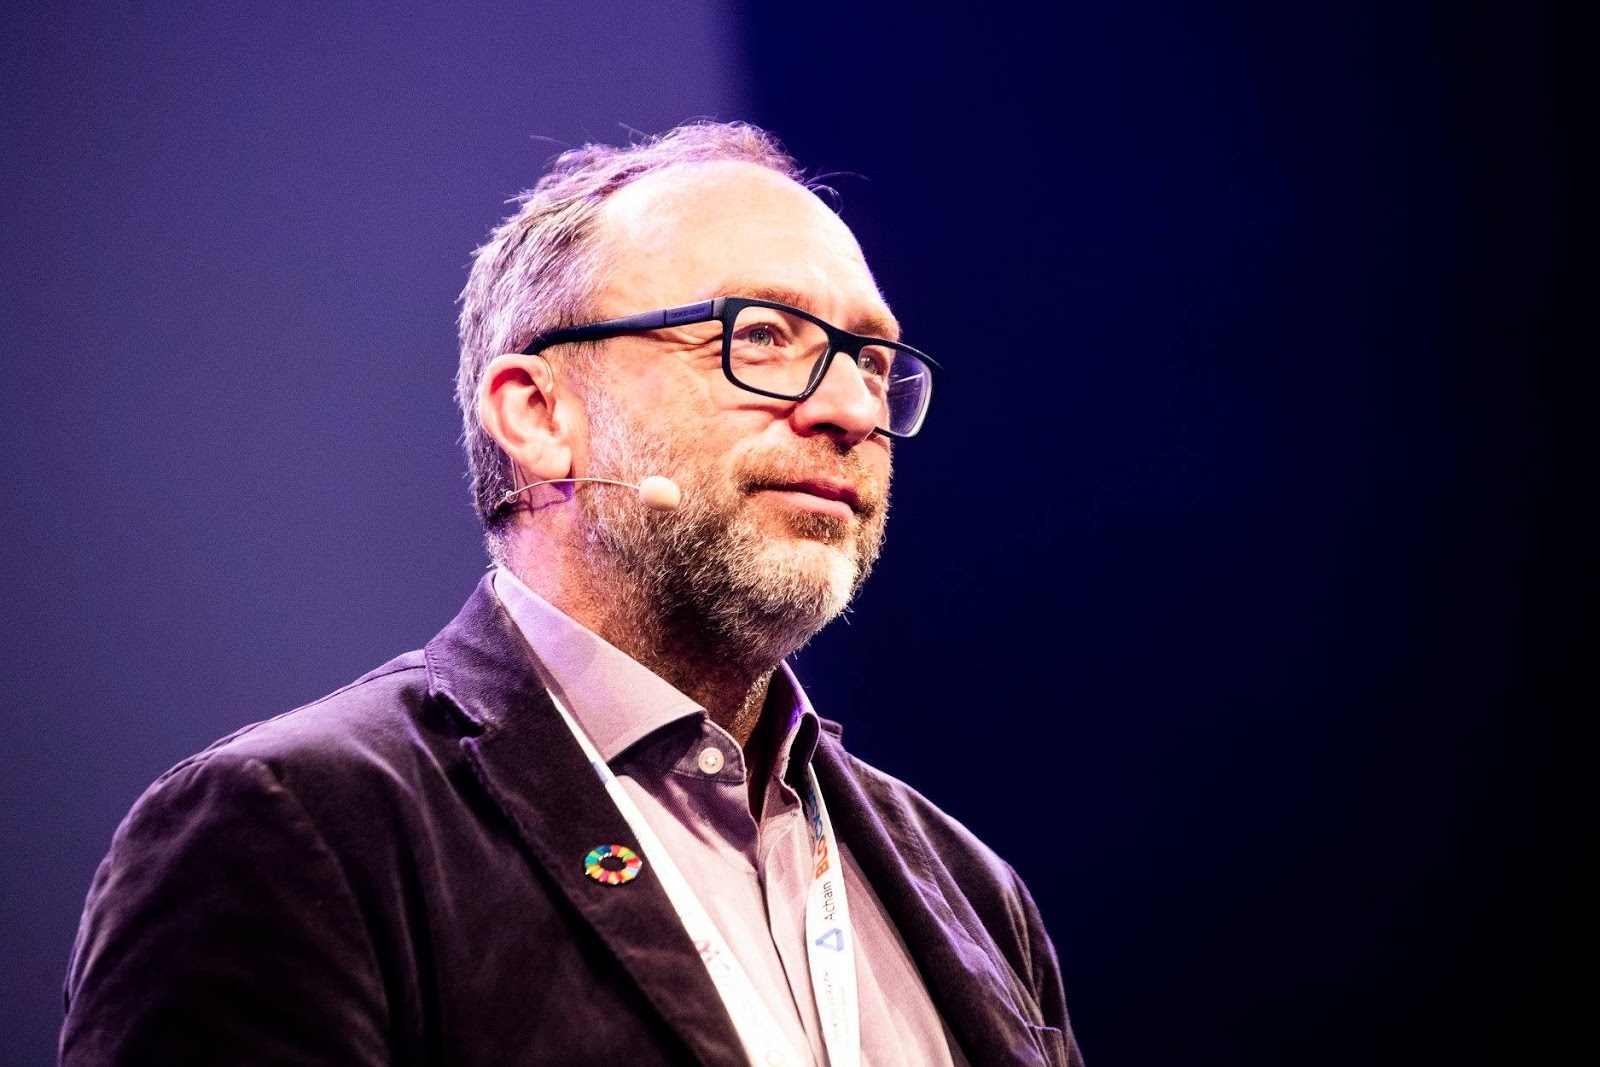 “You Can’t Ban Blockchain. It’s Math”: a Talk with Jimmy Wales